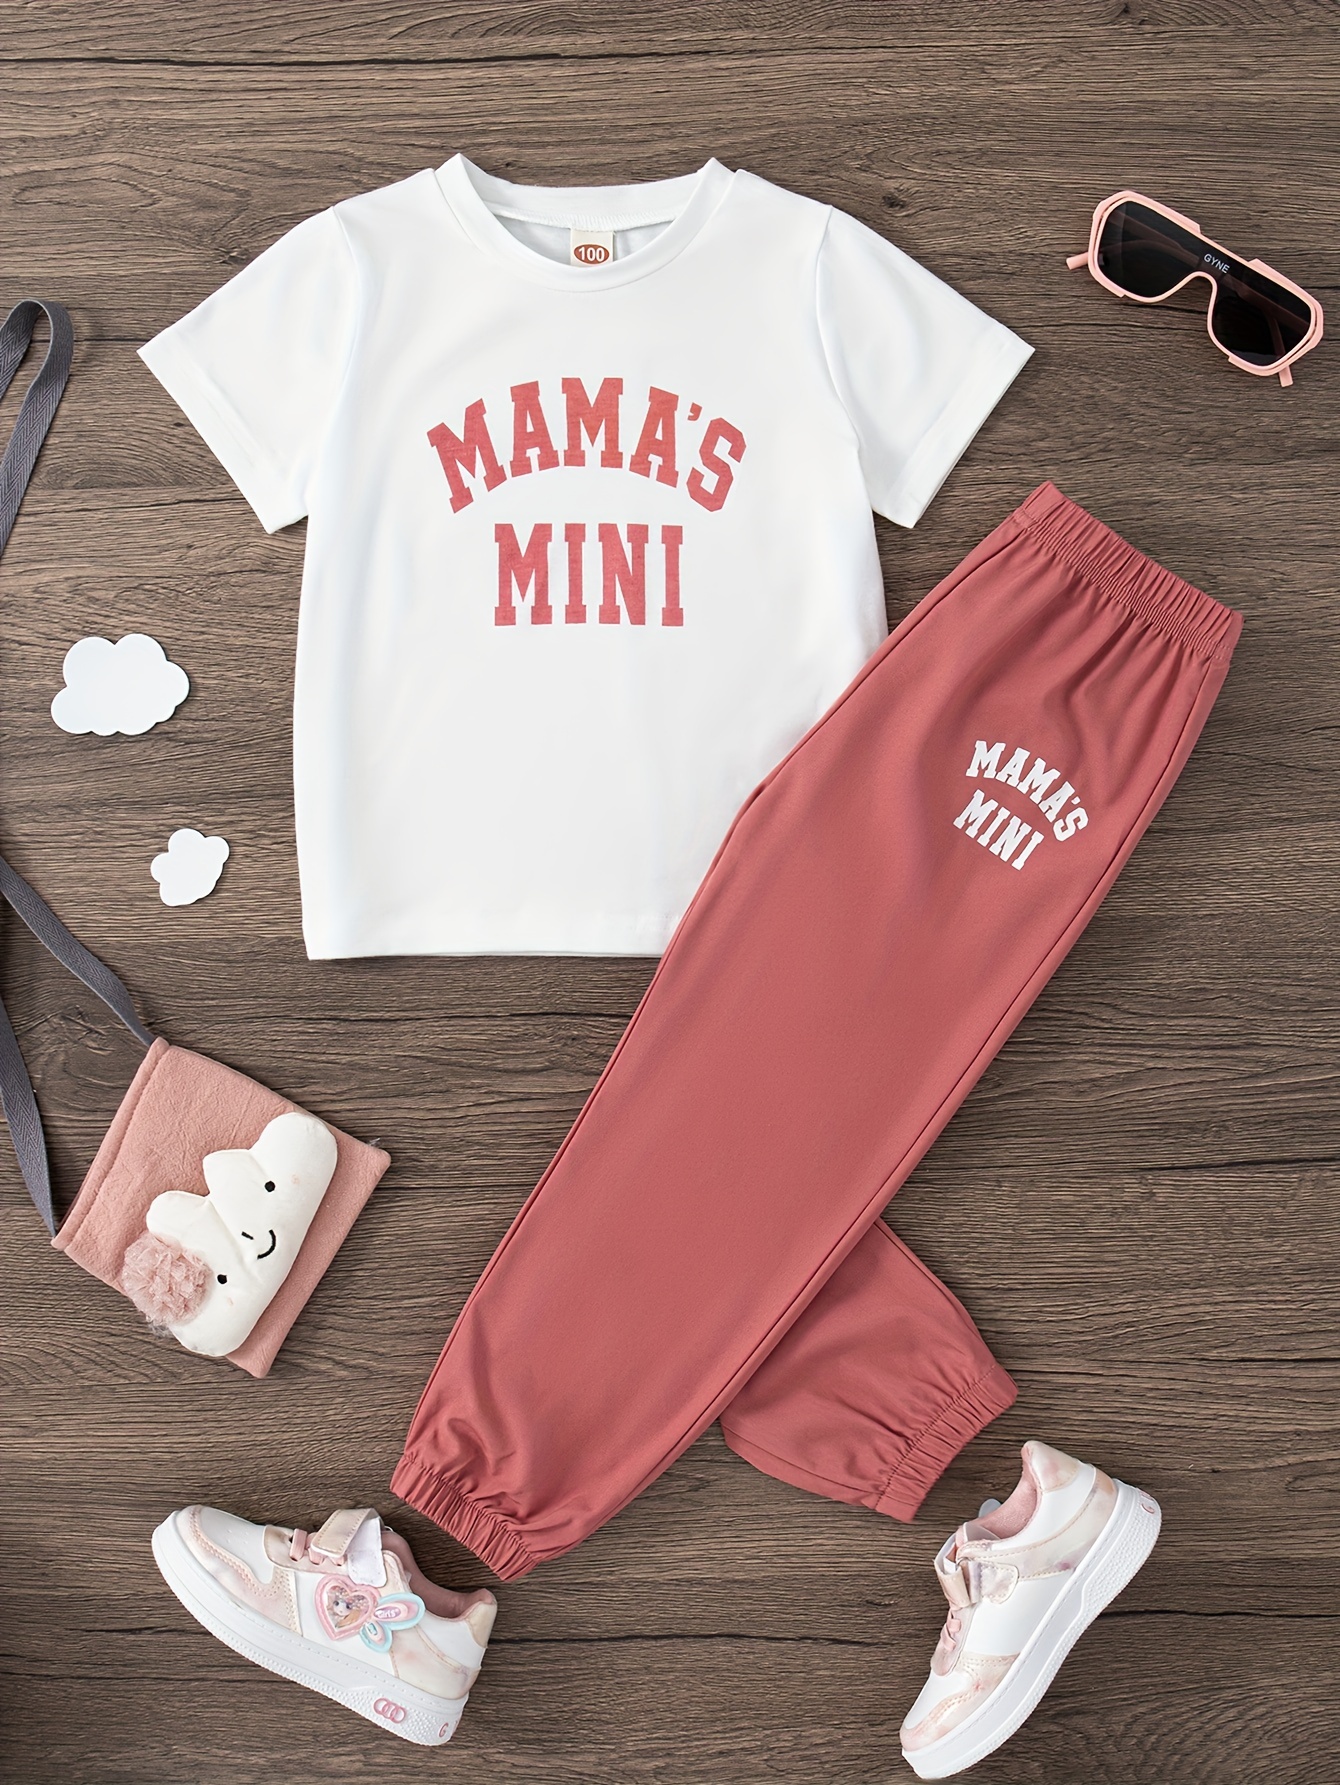 Personalised Kids T-shirt and Leggings Set. Girls Summer Outfit. Pink.  Blue. Tan